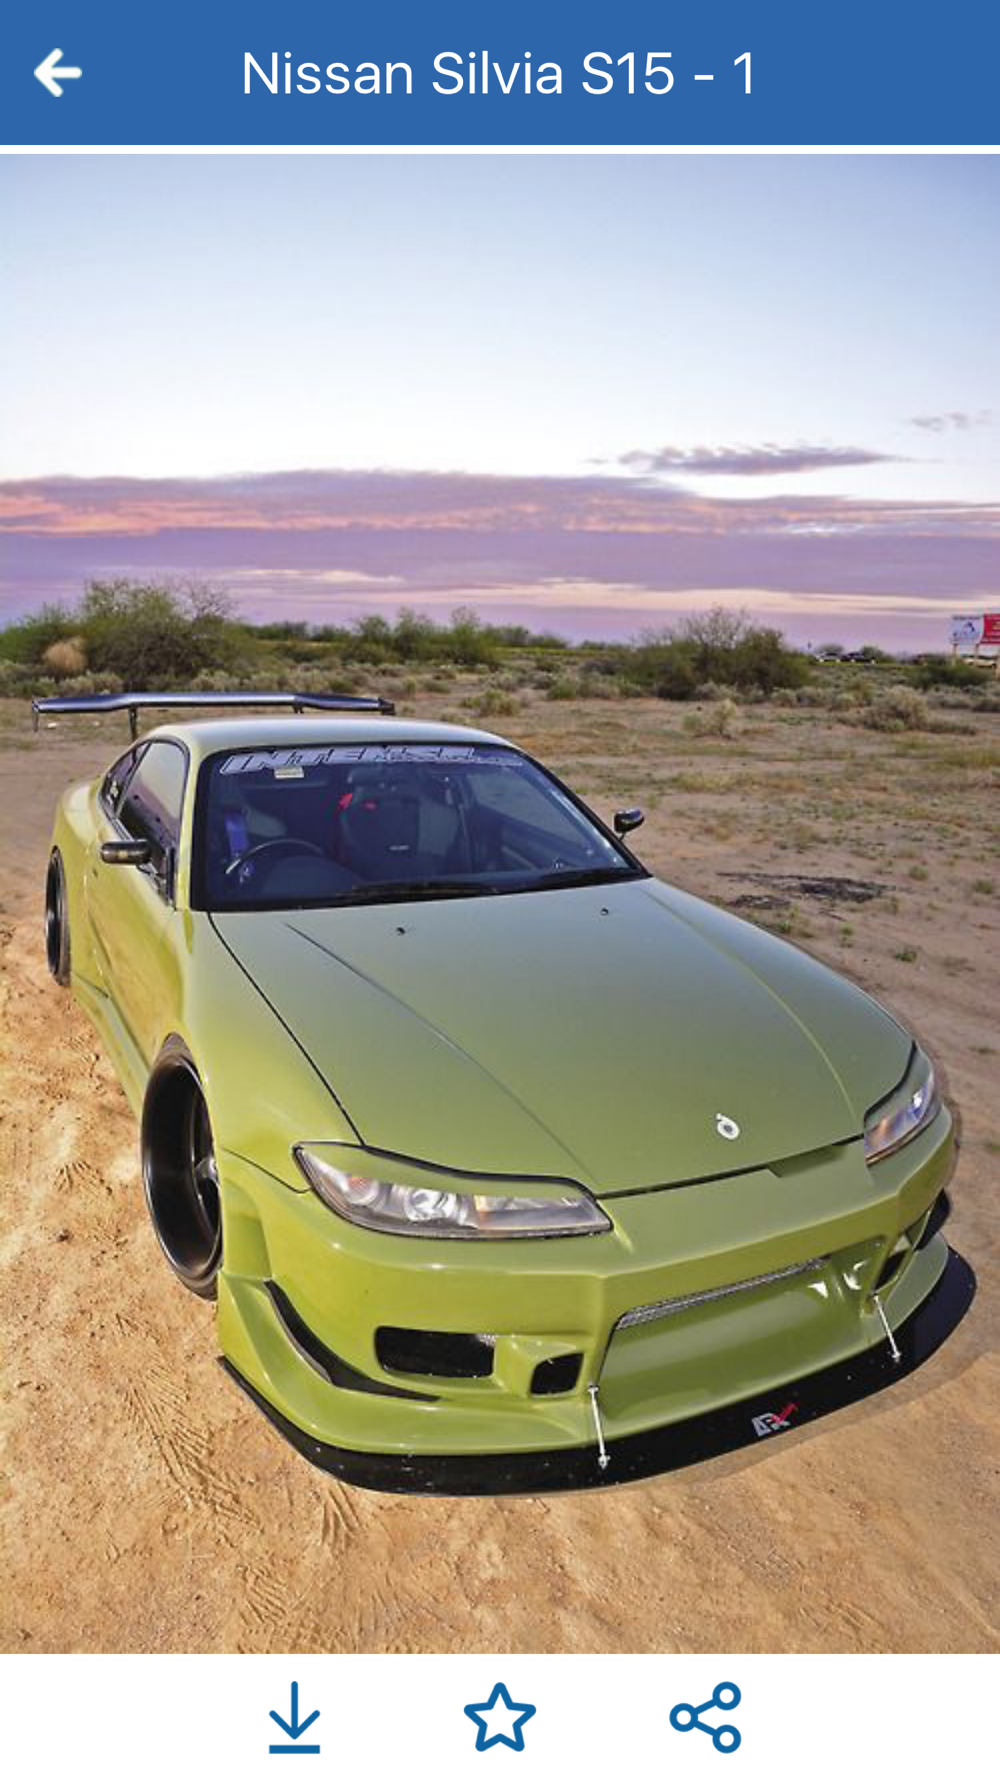 Hd Car Wallpapers Nissan Silvia S15 Edition Free Download App For Iphone Steprimo Com